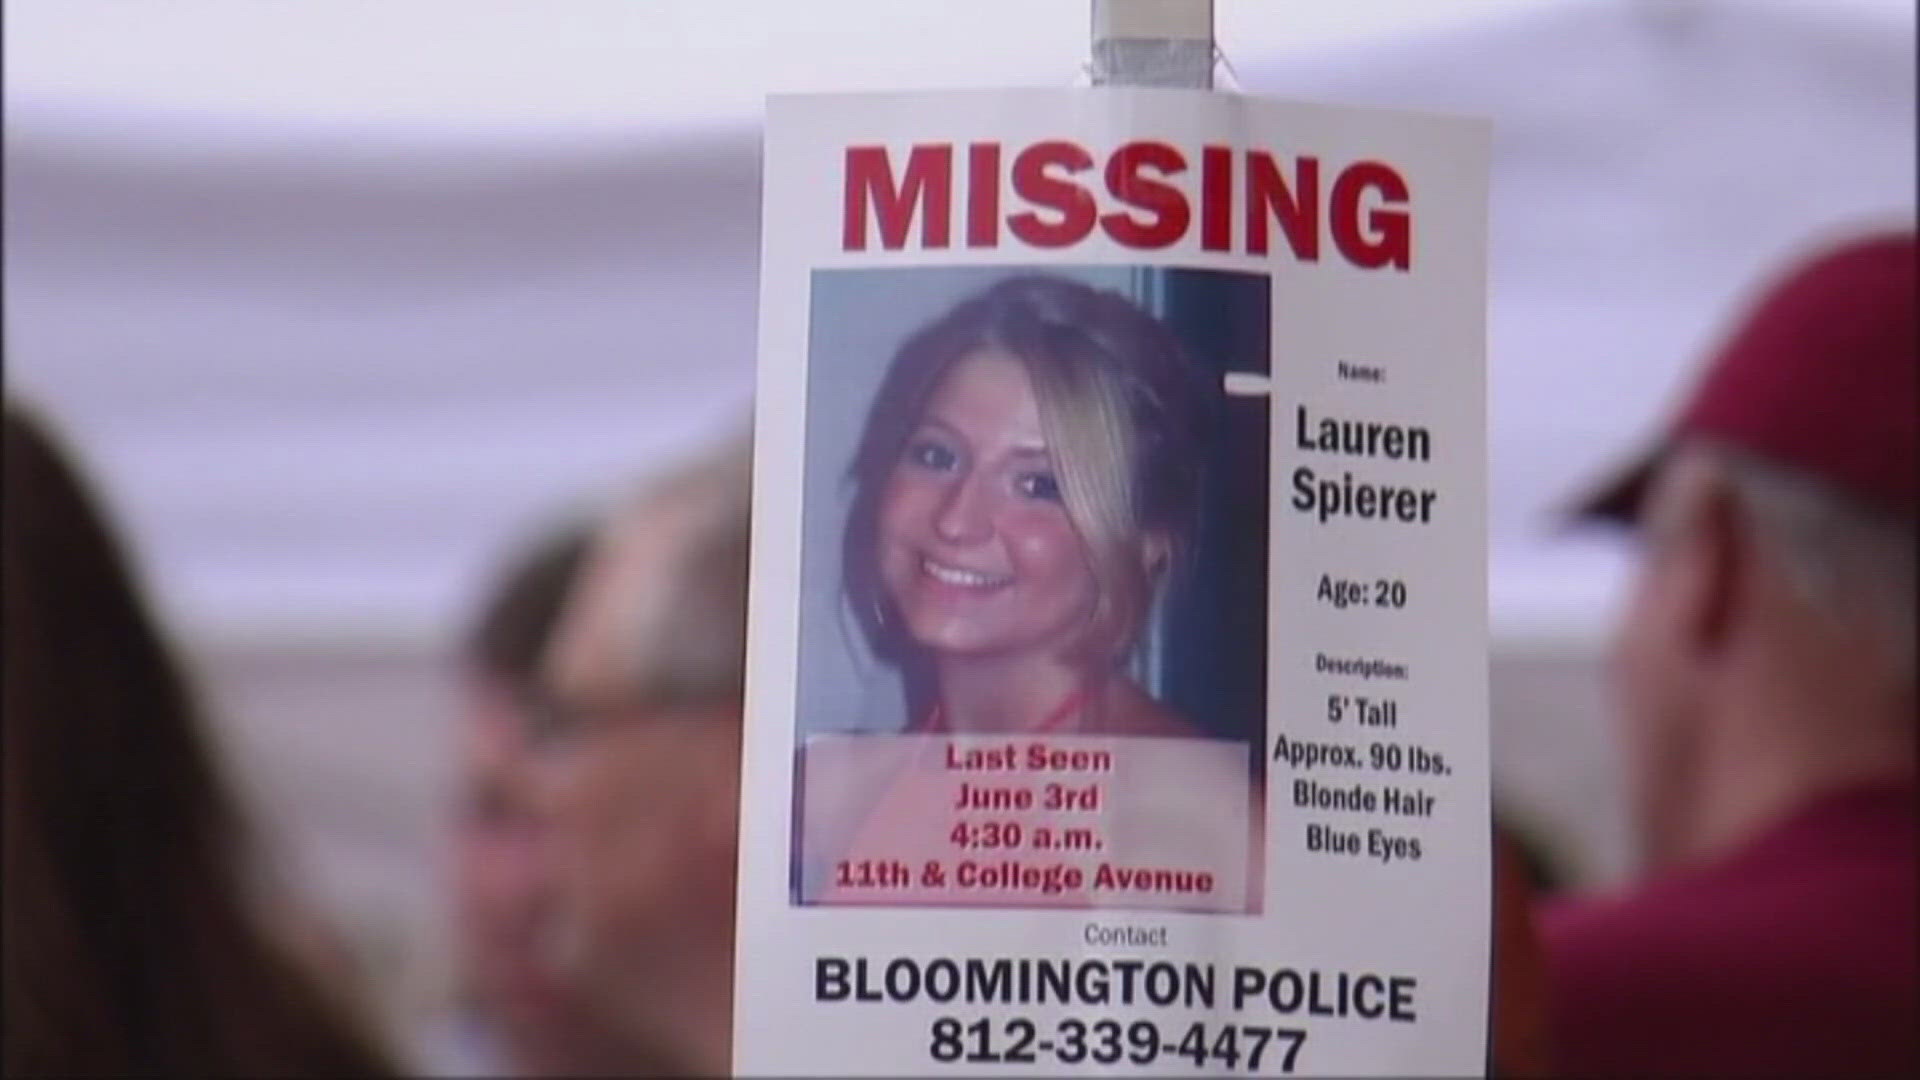 Next Monday marks 13 years since sophomore Lauren Spierer disappeared from the Indiana University campus.